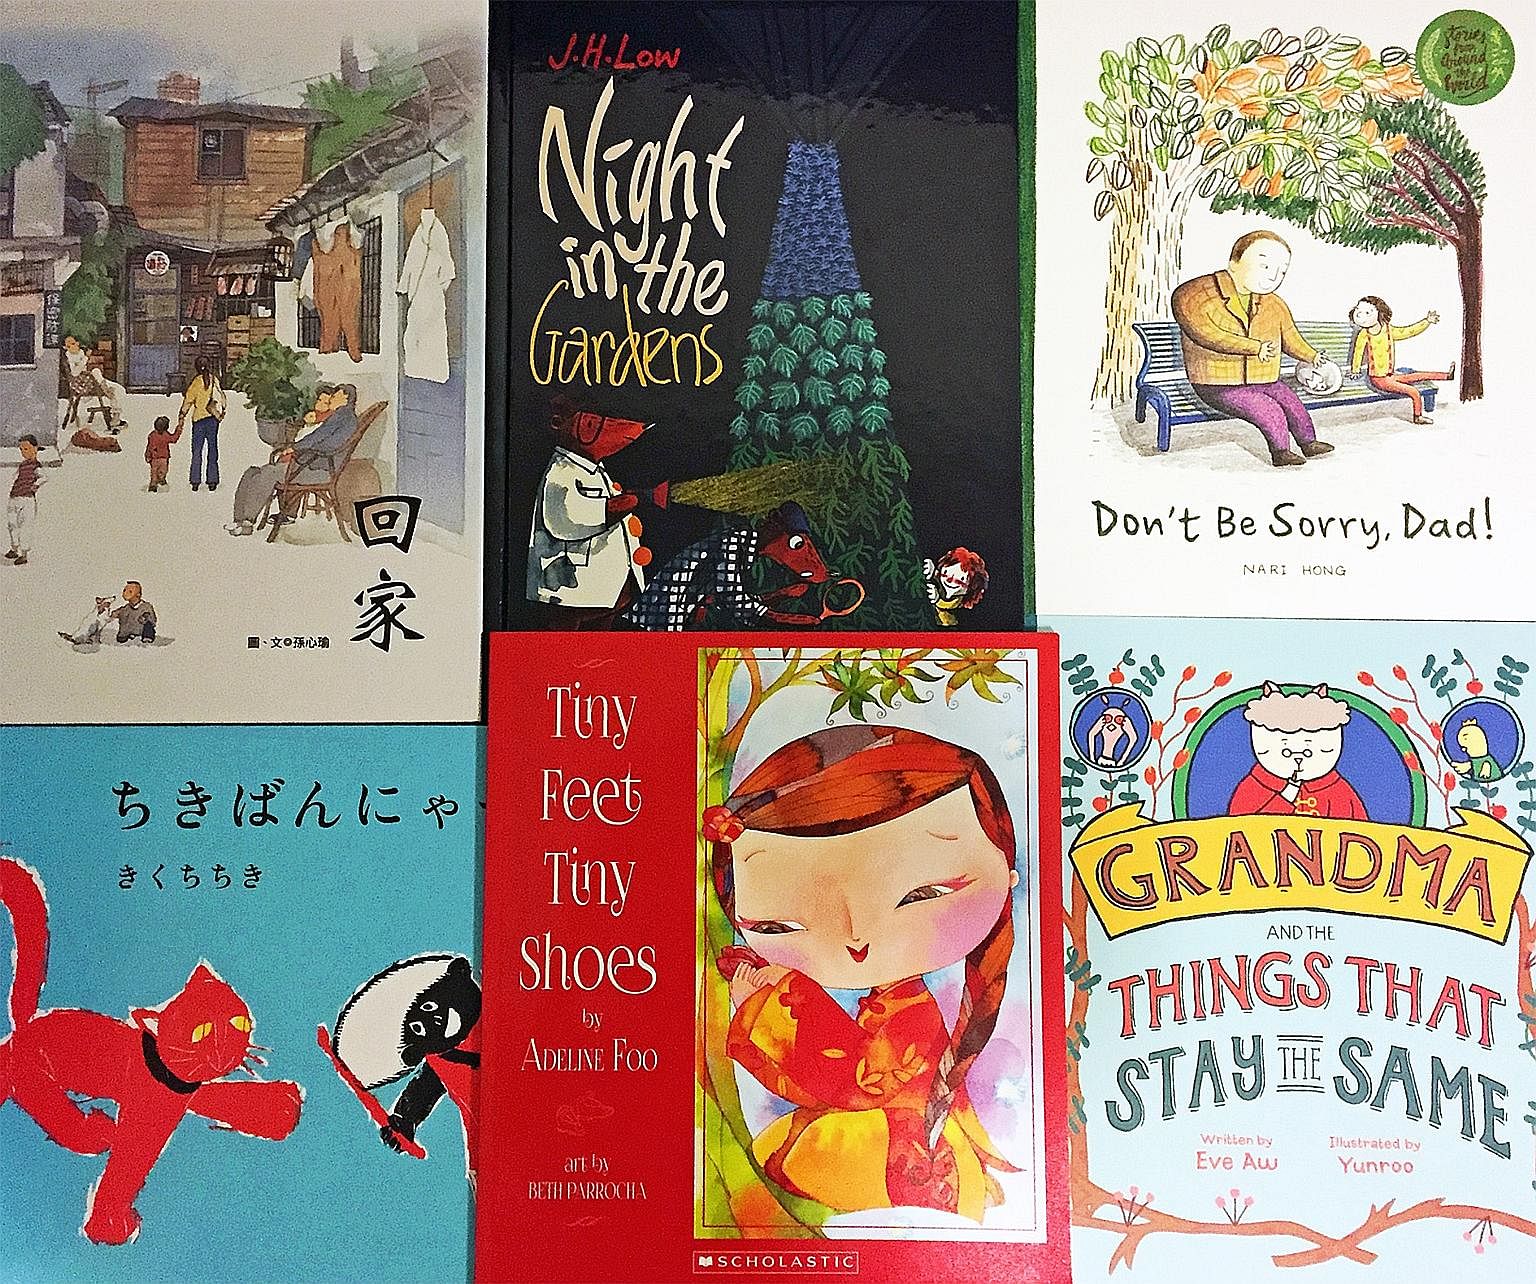 Shortlisted for the award are (clockwise from top left) Home by Sun Hsin-yu; Night In The Gardens by J.H. Low; Don't Be Sorry, Dad! by Nari Hong; Grandma And The Things That Stay The Same by Eve Aw and Tan Yun Ru; Tiny Feet, Tiny Shoes by Adeline Foo